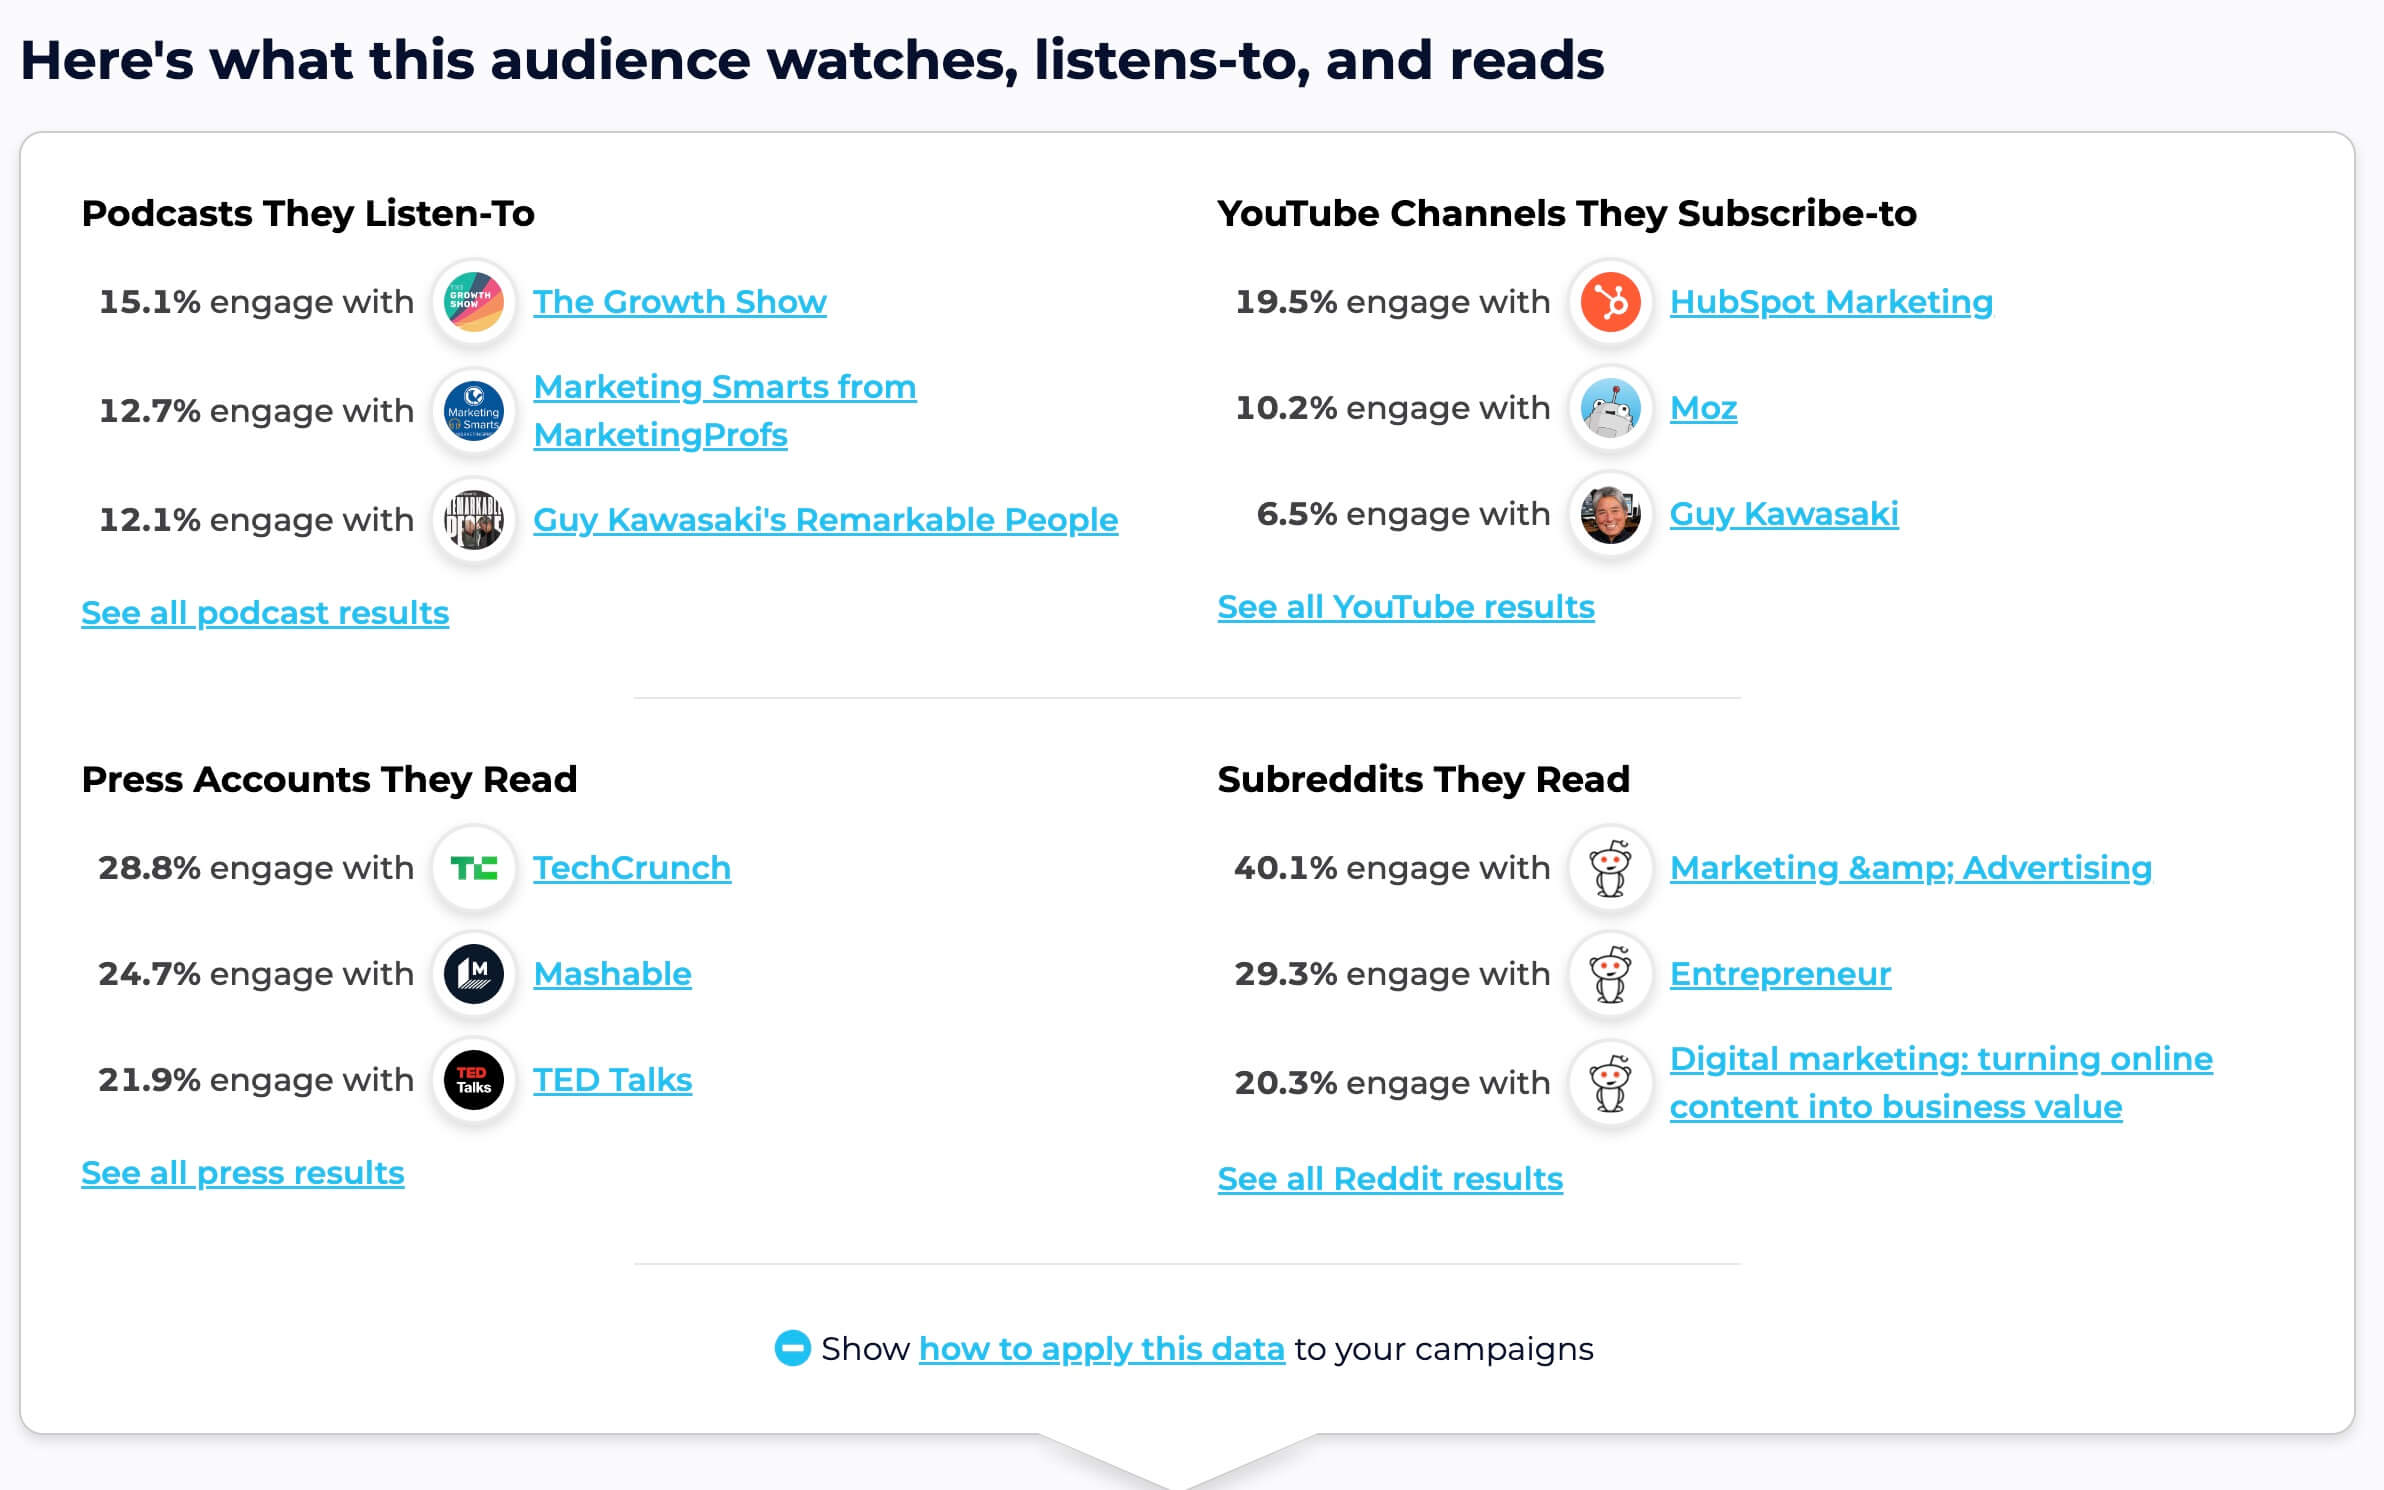 What HubSpots Audience watches listens-to and reads